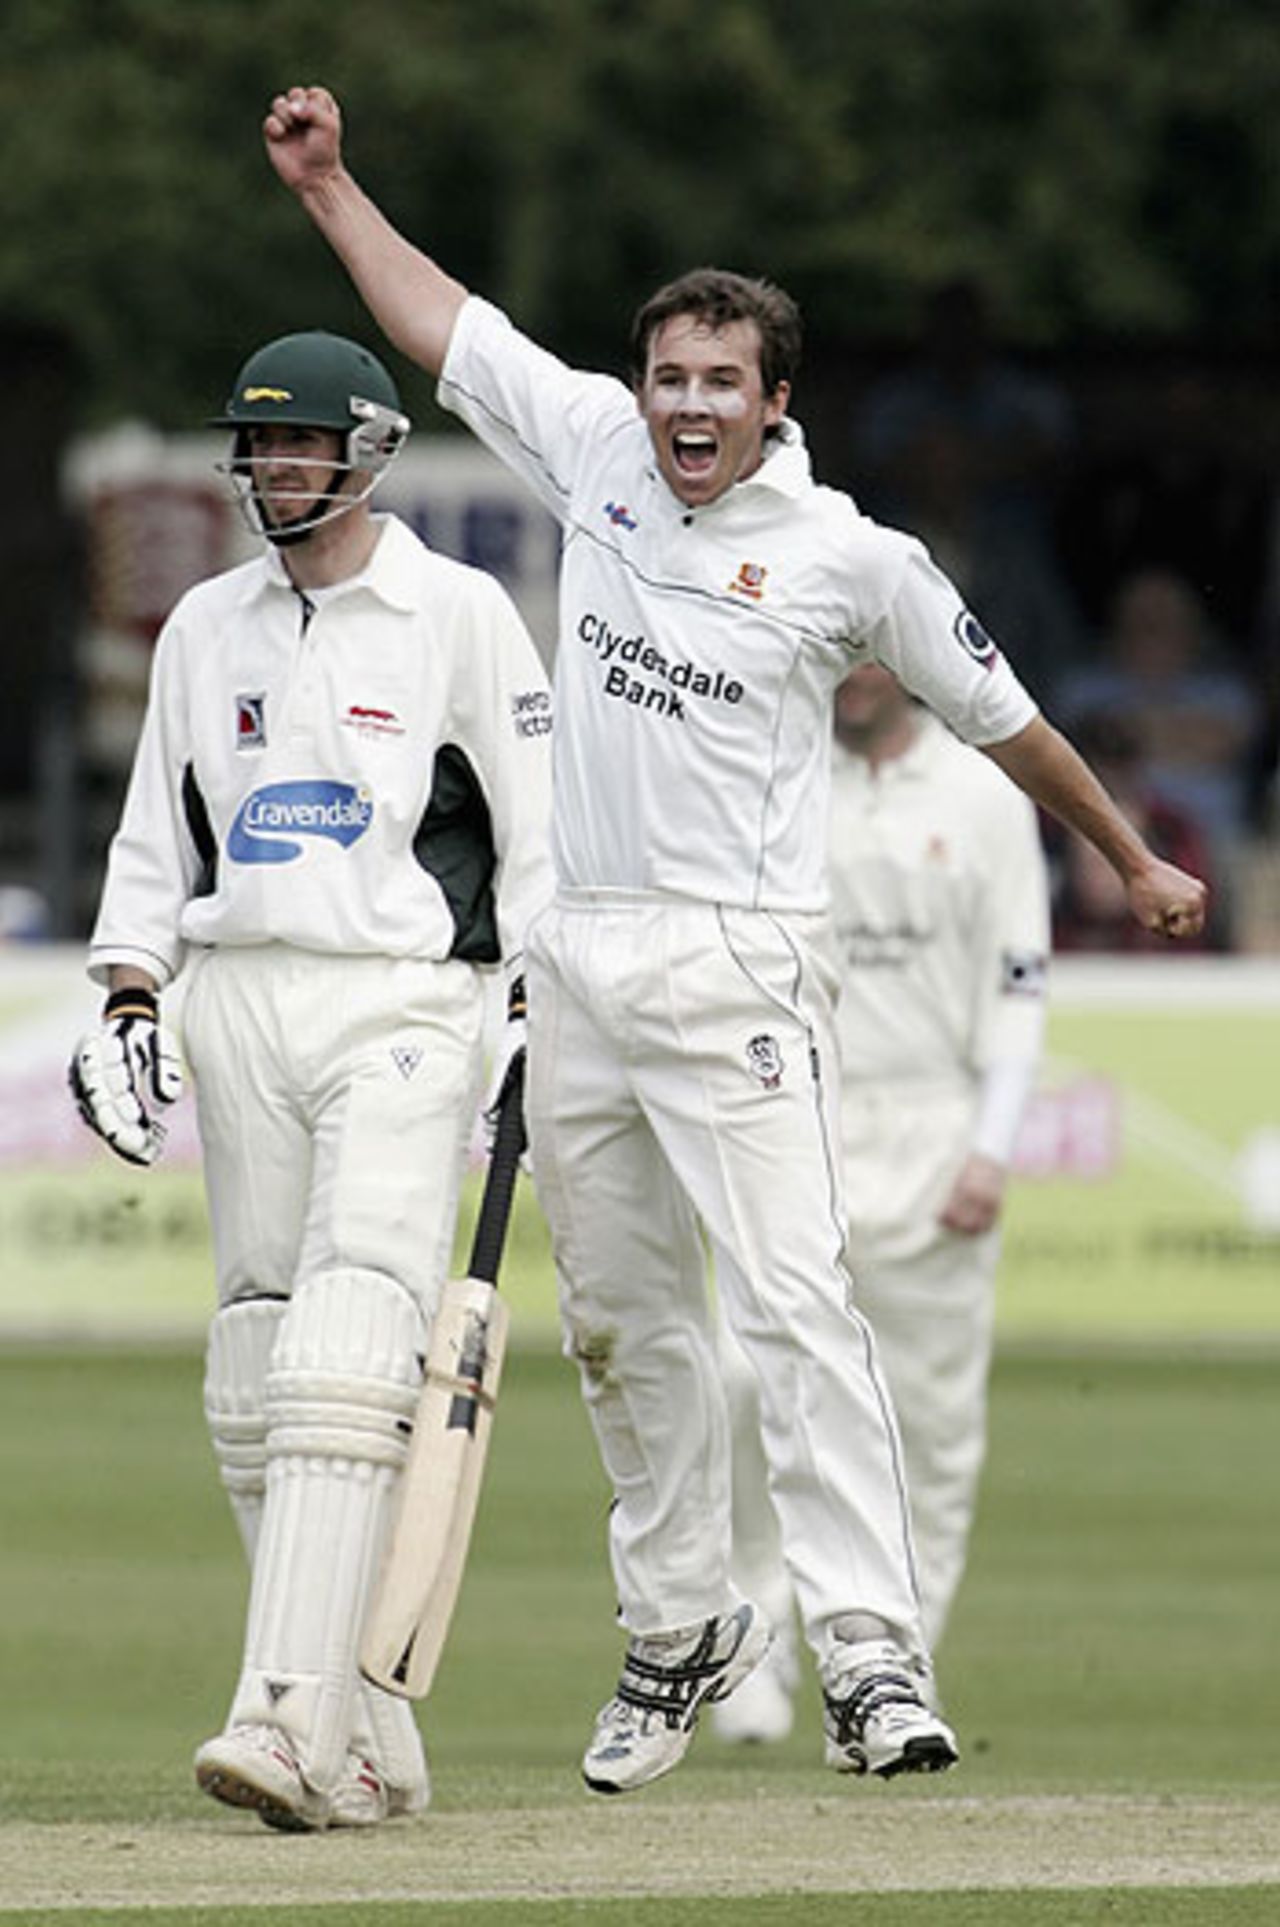 Tony Palladino claims another of his six wickets, Essex v Leicestershire, Chelmsford, May 4, 2006